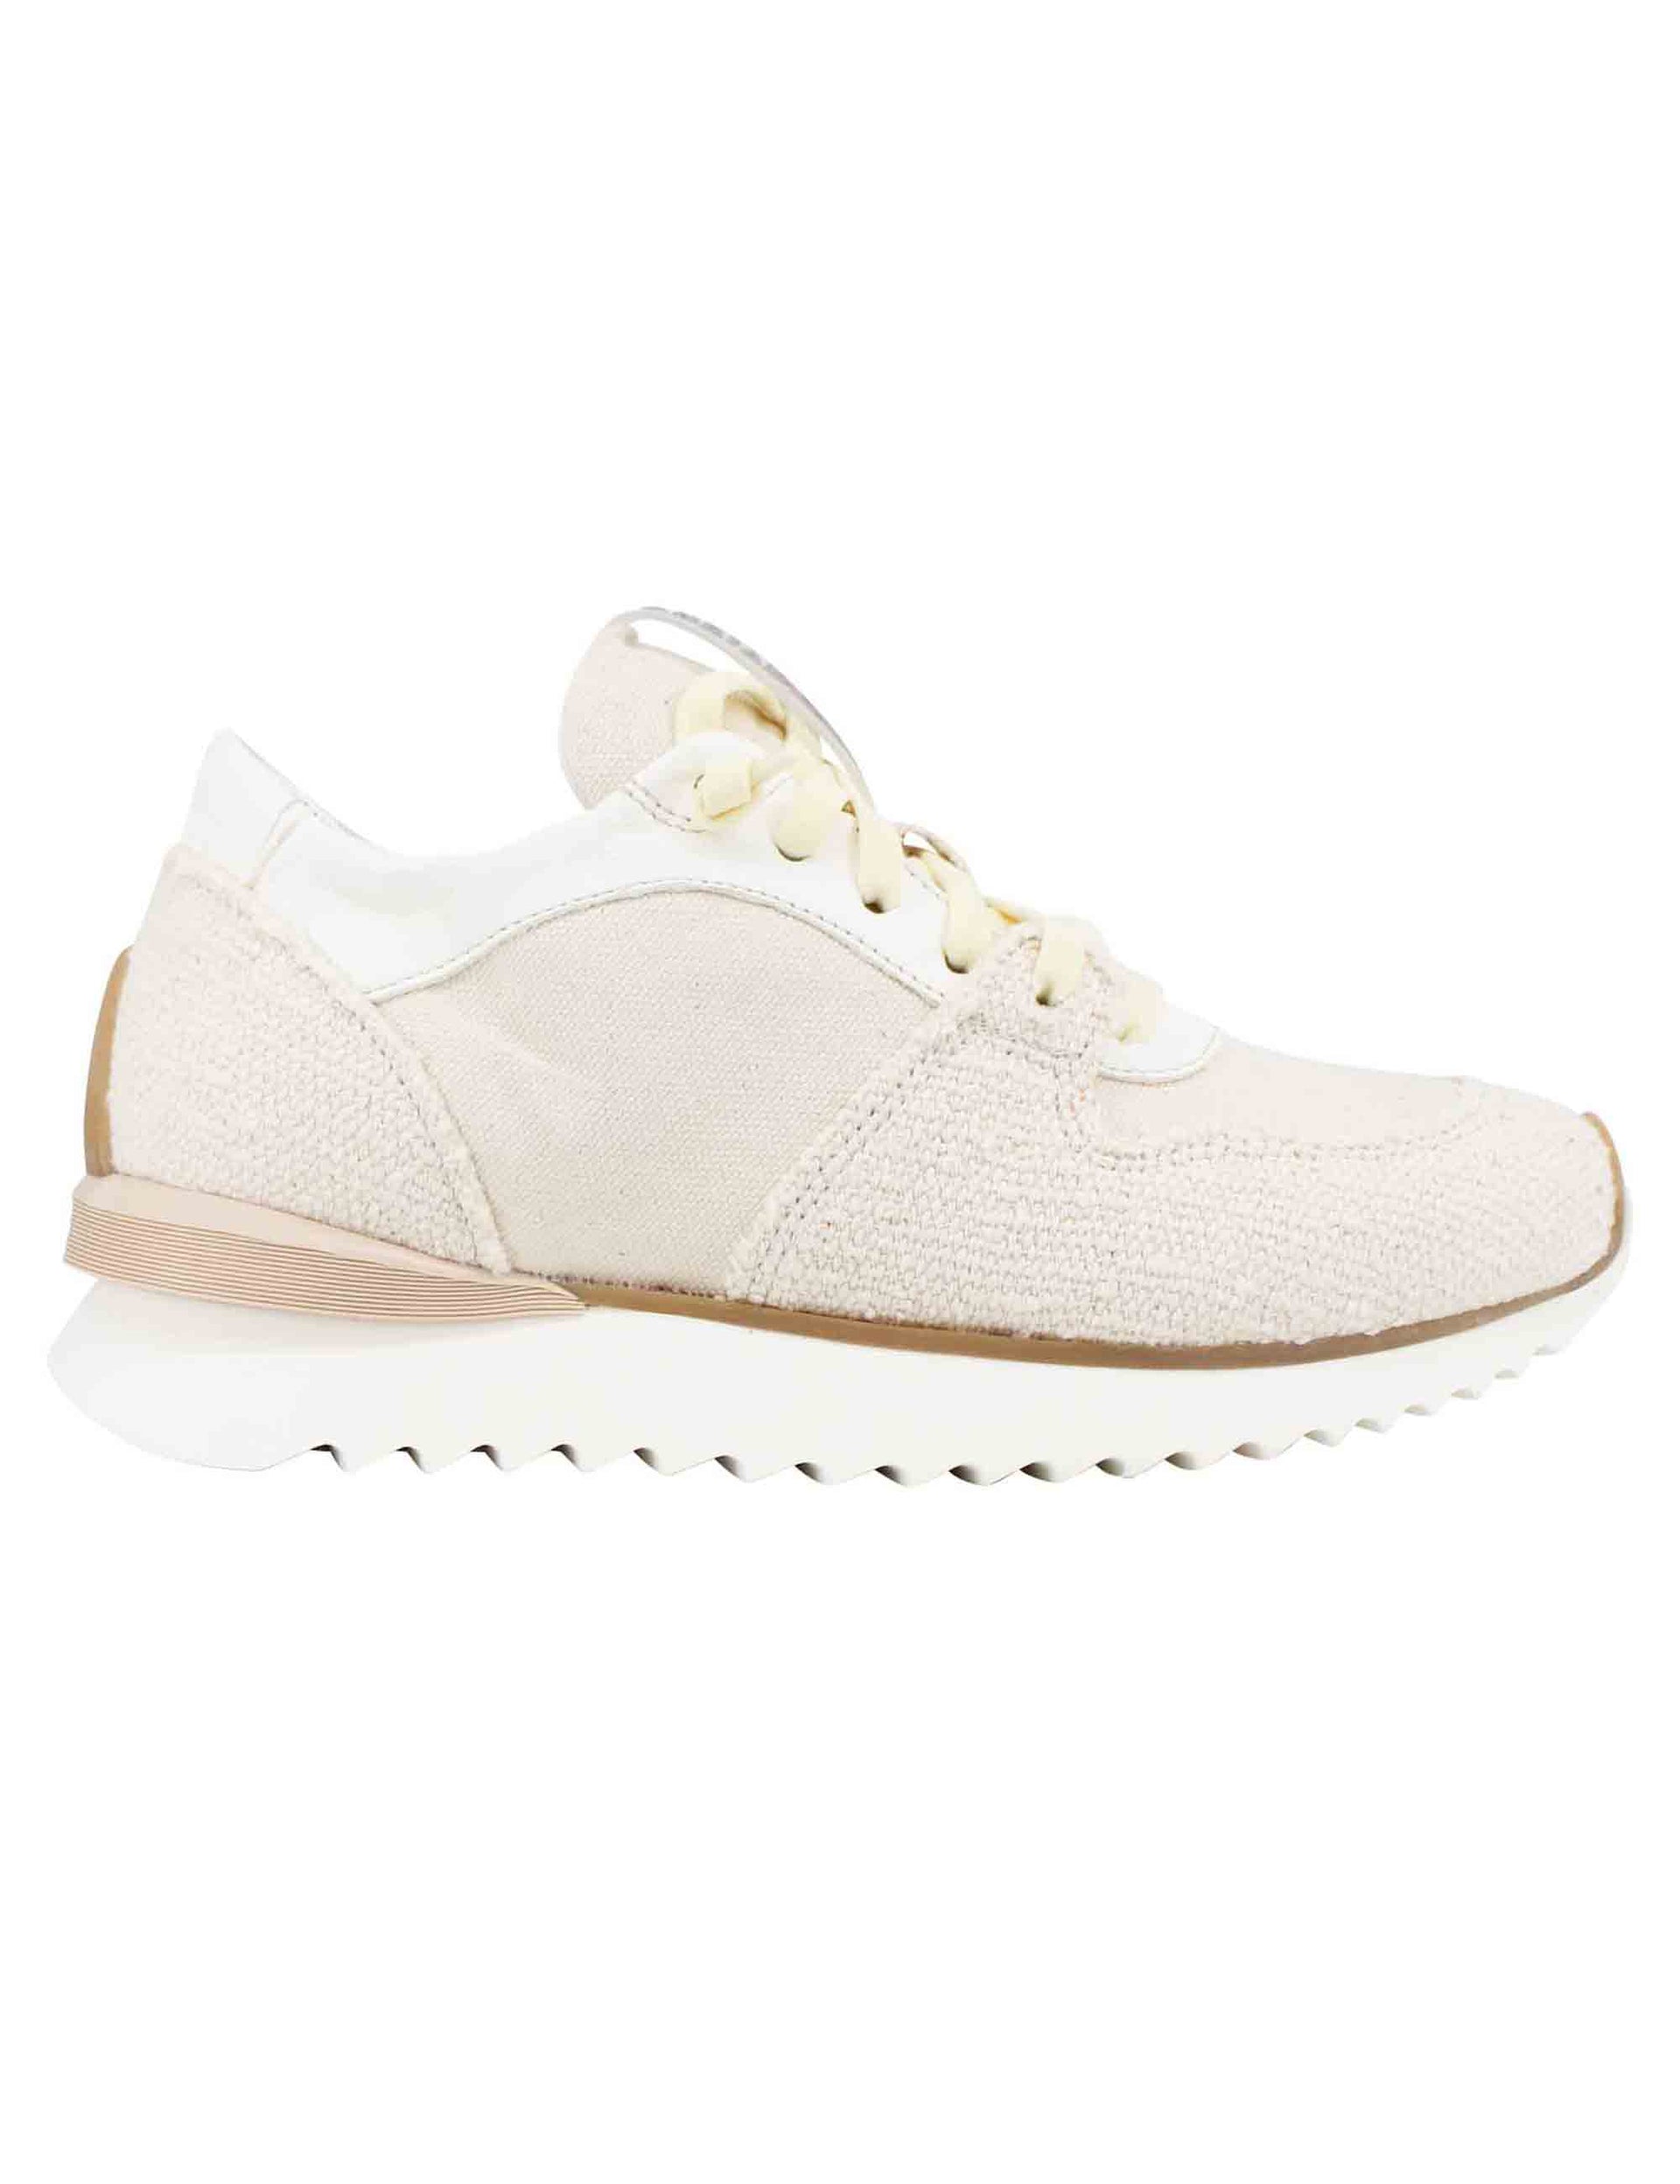 Women's sneakers in beige leather and fabric